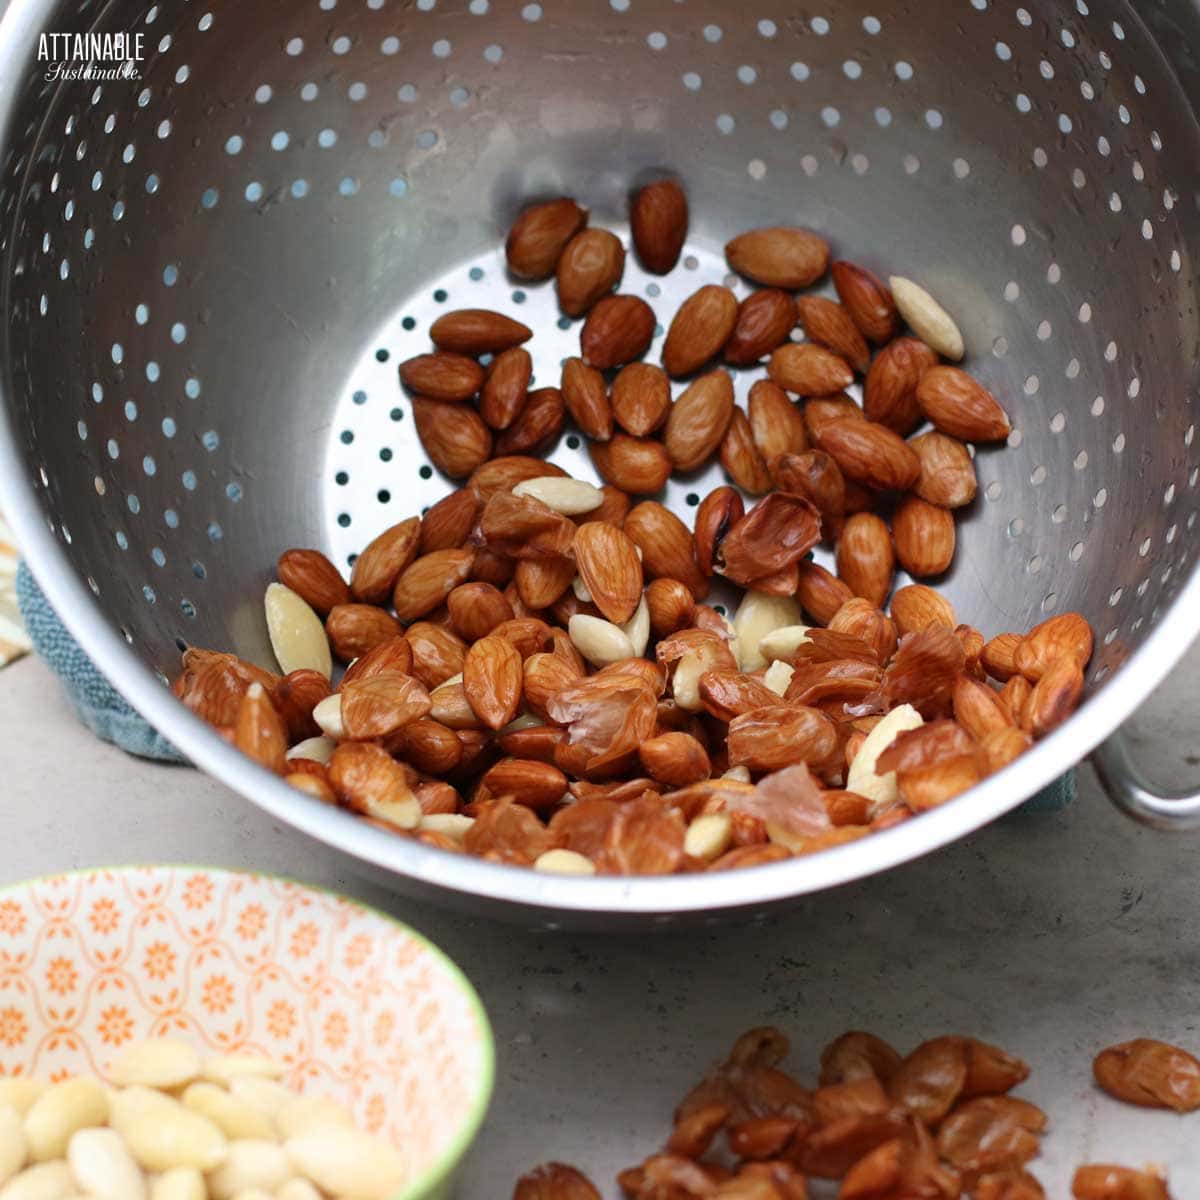 colander full of partially finished blanched almonds.